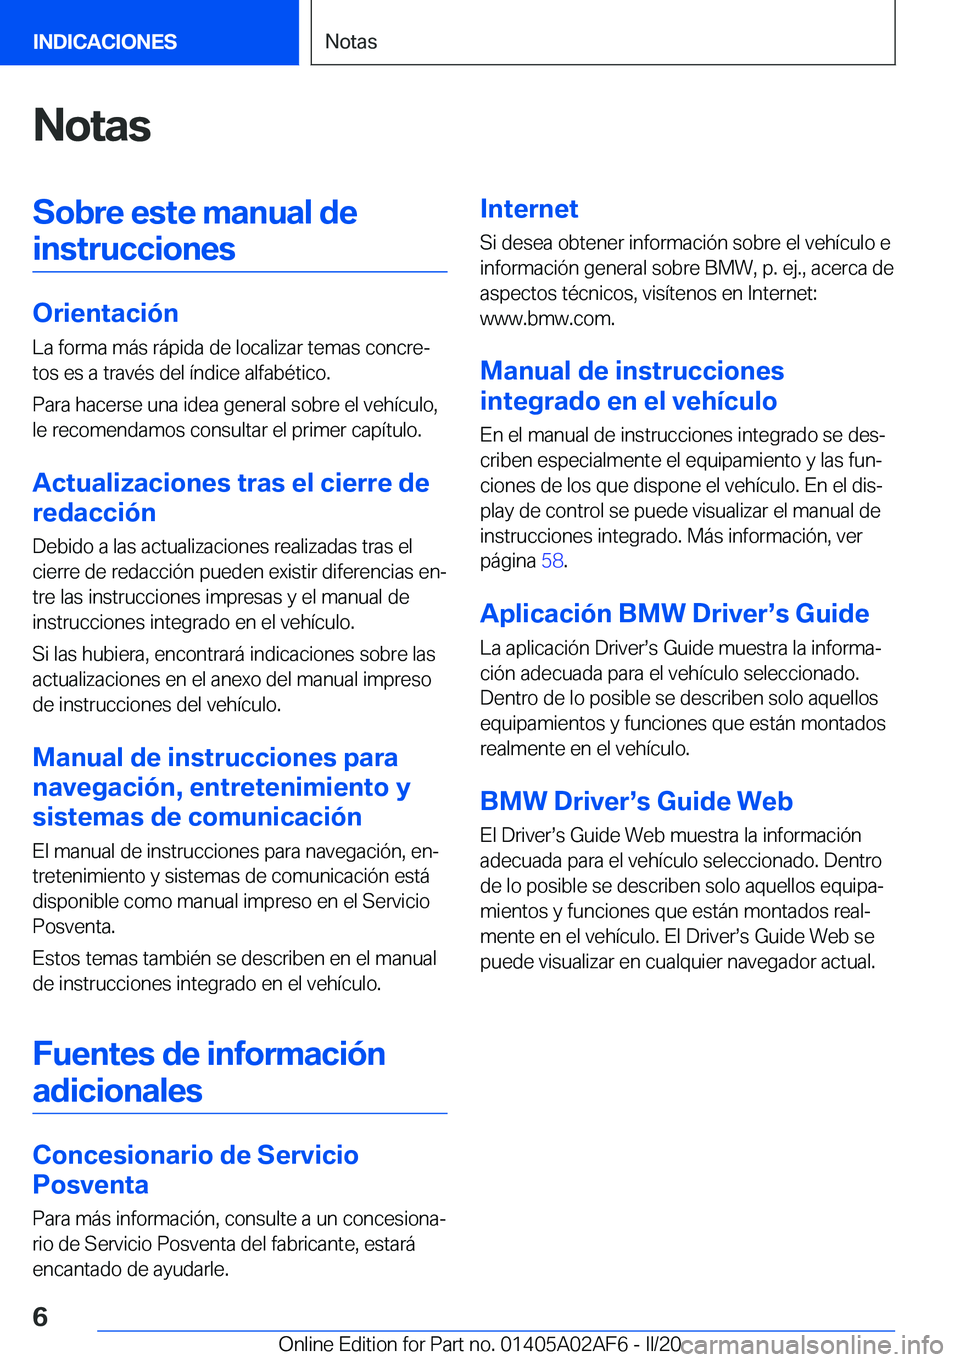 BMW X1 2020  Manuales de Empleo (in Spanish) �N�o�t�a�s�S�o�b�r�e��e�s�t�e��m�a�n�u�a�l��d�e�i�n�s�t�r�u�c�c�i�o�n�e�s
�O�r�i�e�n�t�a�c�i�